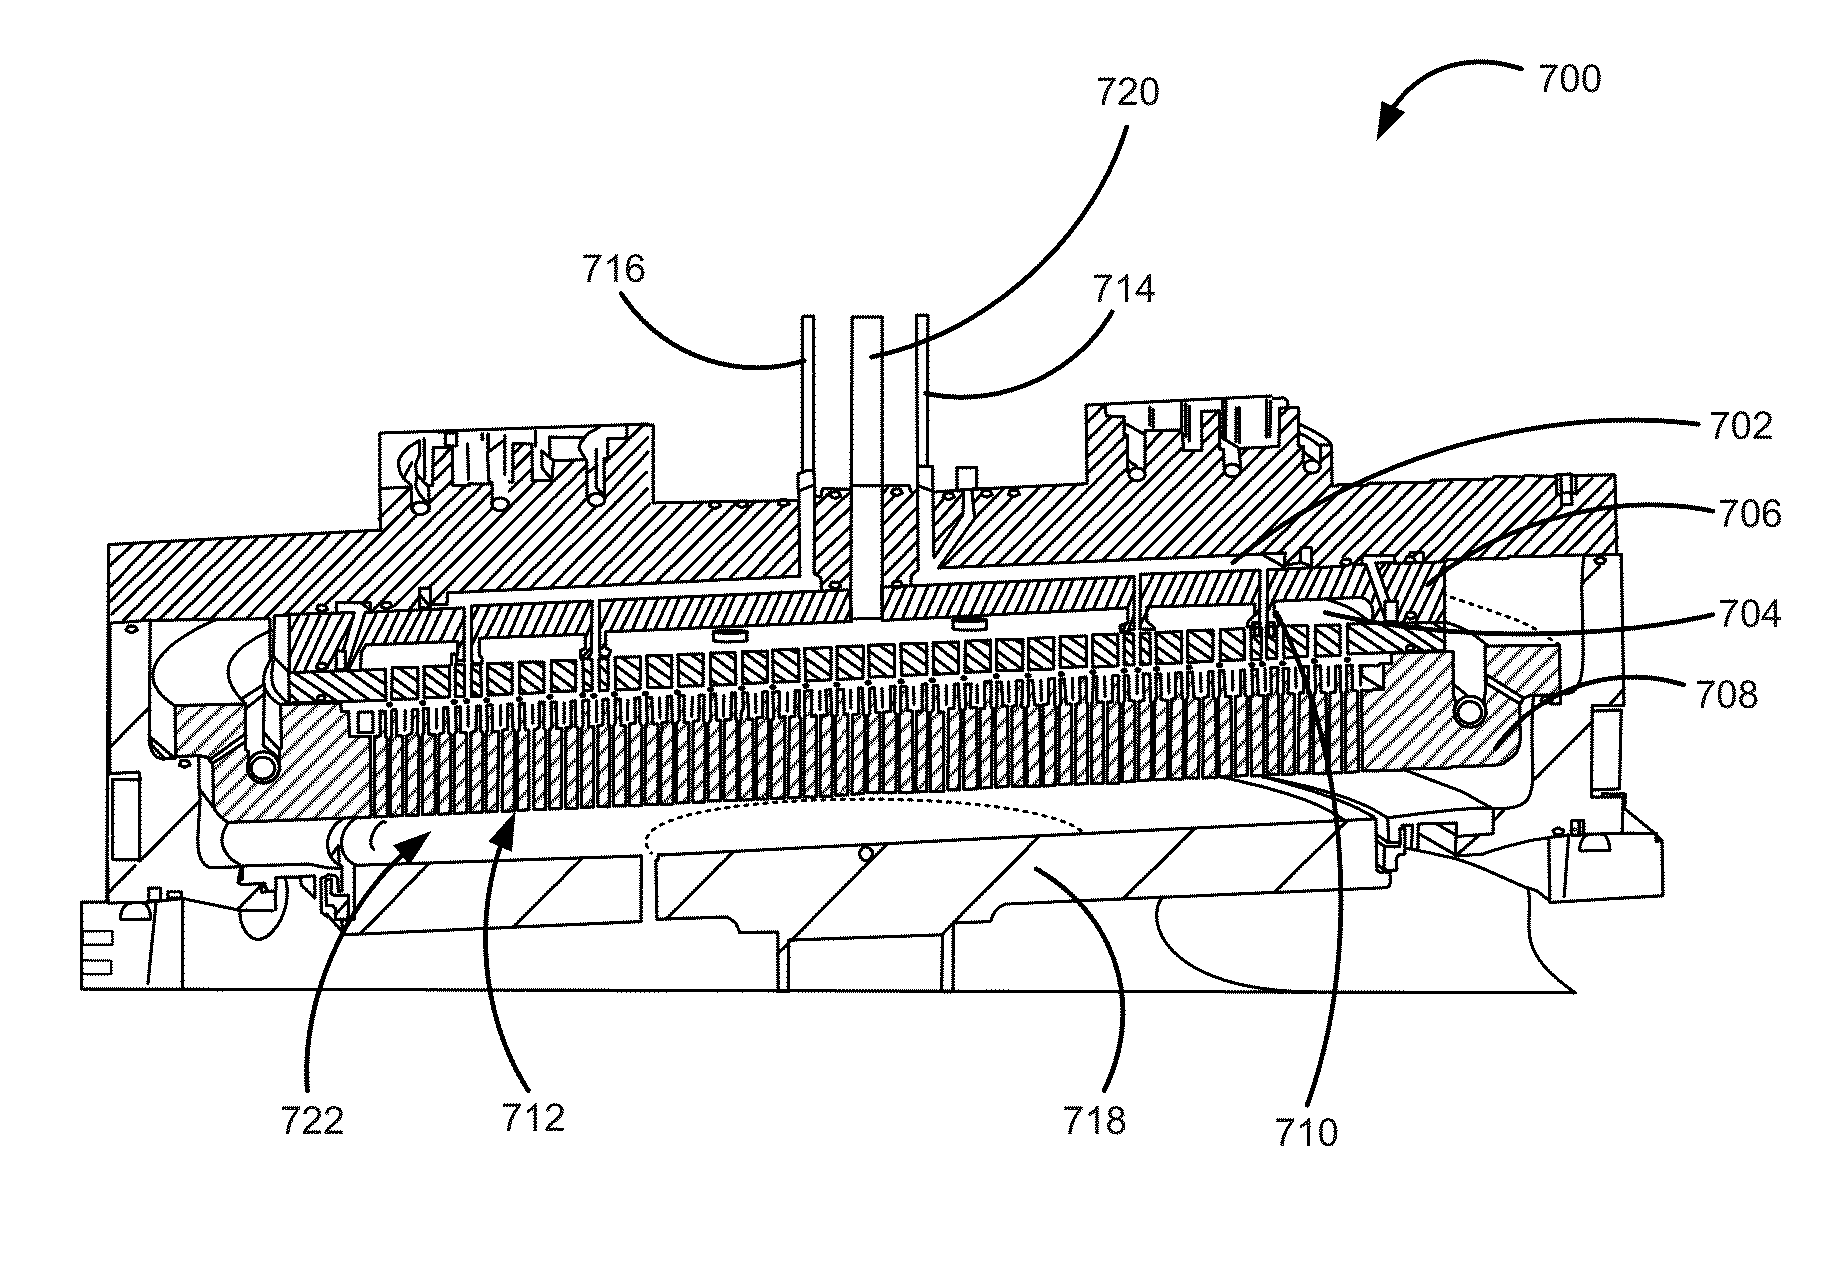 Showerhead assembly and components thereof